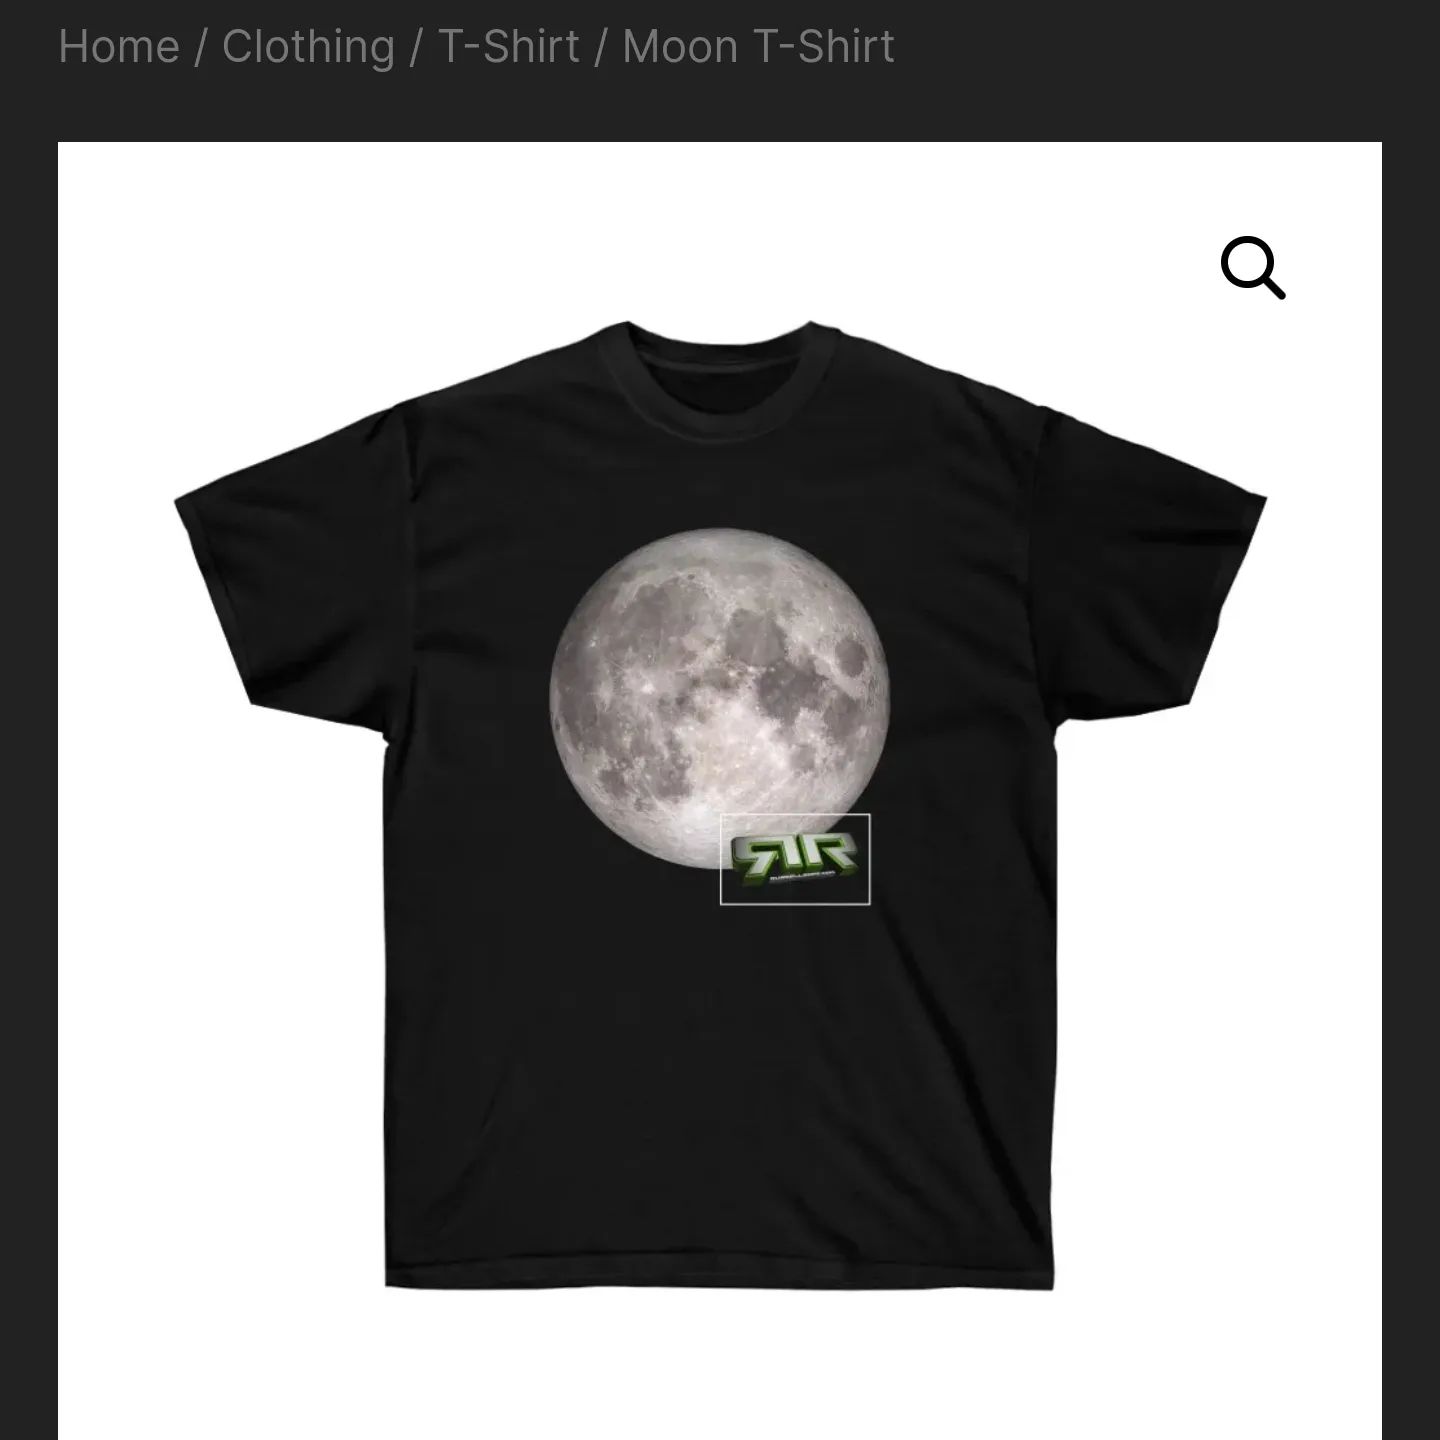 Peep The Collection; Like #Space Steez #FullMoon #TshiRt Purchase Online #sHoP #sWaG @RussellRope #DotCom 🌕👕🛒💳🛍
.
.
.
.
#swaggy #design #art #entertainment #lifestyle #apparel #creator #steez #eyecandy #clothing #hollywood #losangeles #hwood #california #nightclub #create #lit #style #fashion  #trendy #space #astro #creative #socialmedia #astro #style